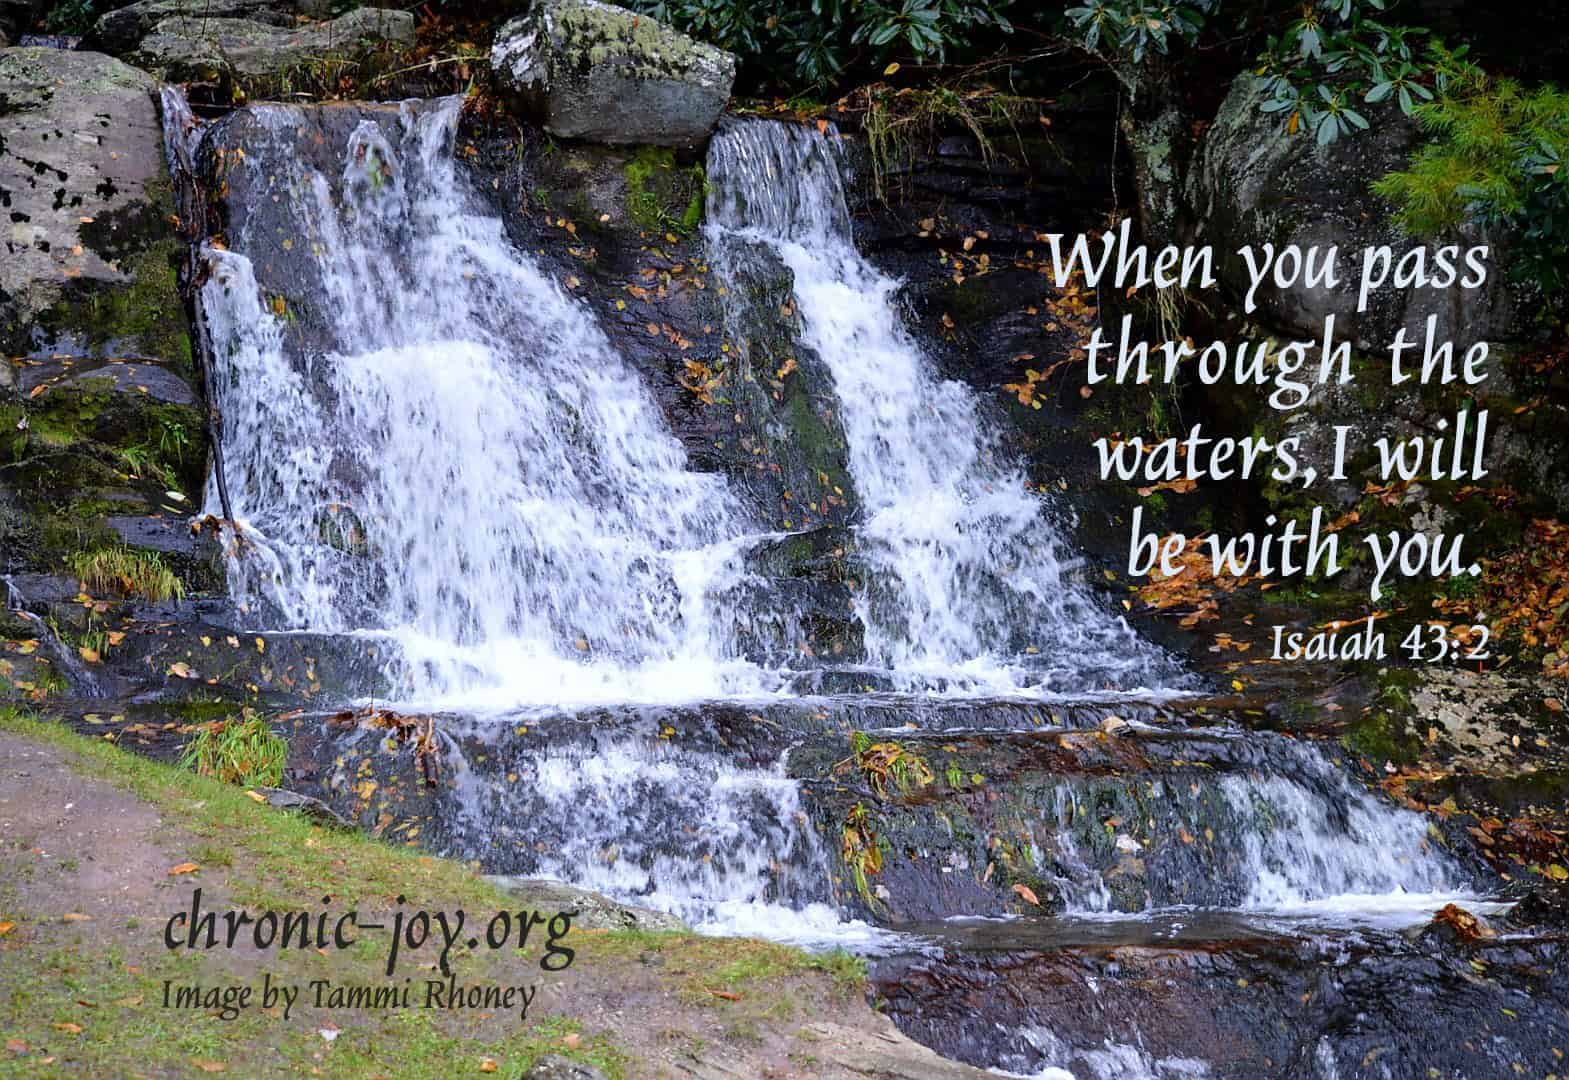 When you pass through the waters, I will be with you. Isaiah 43:2